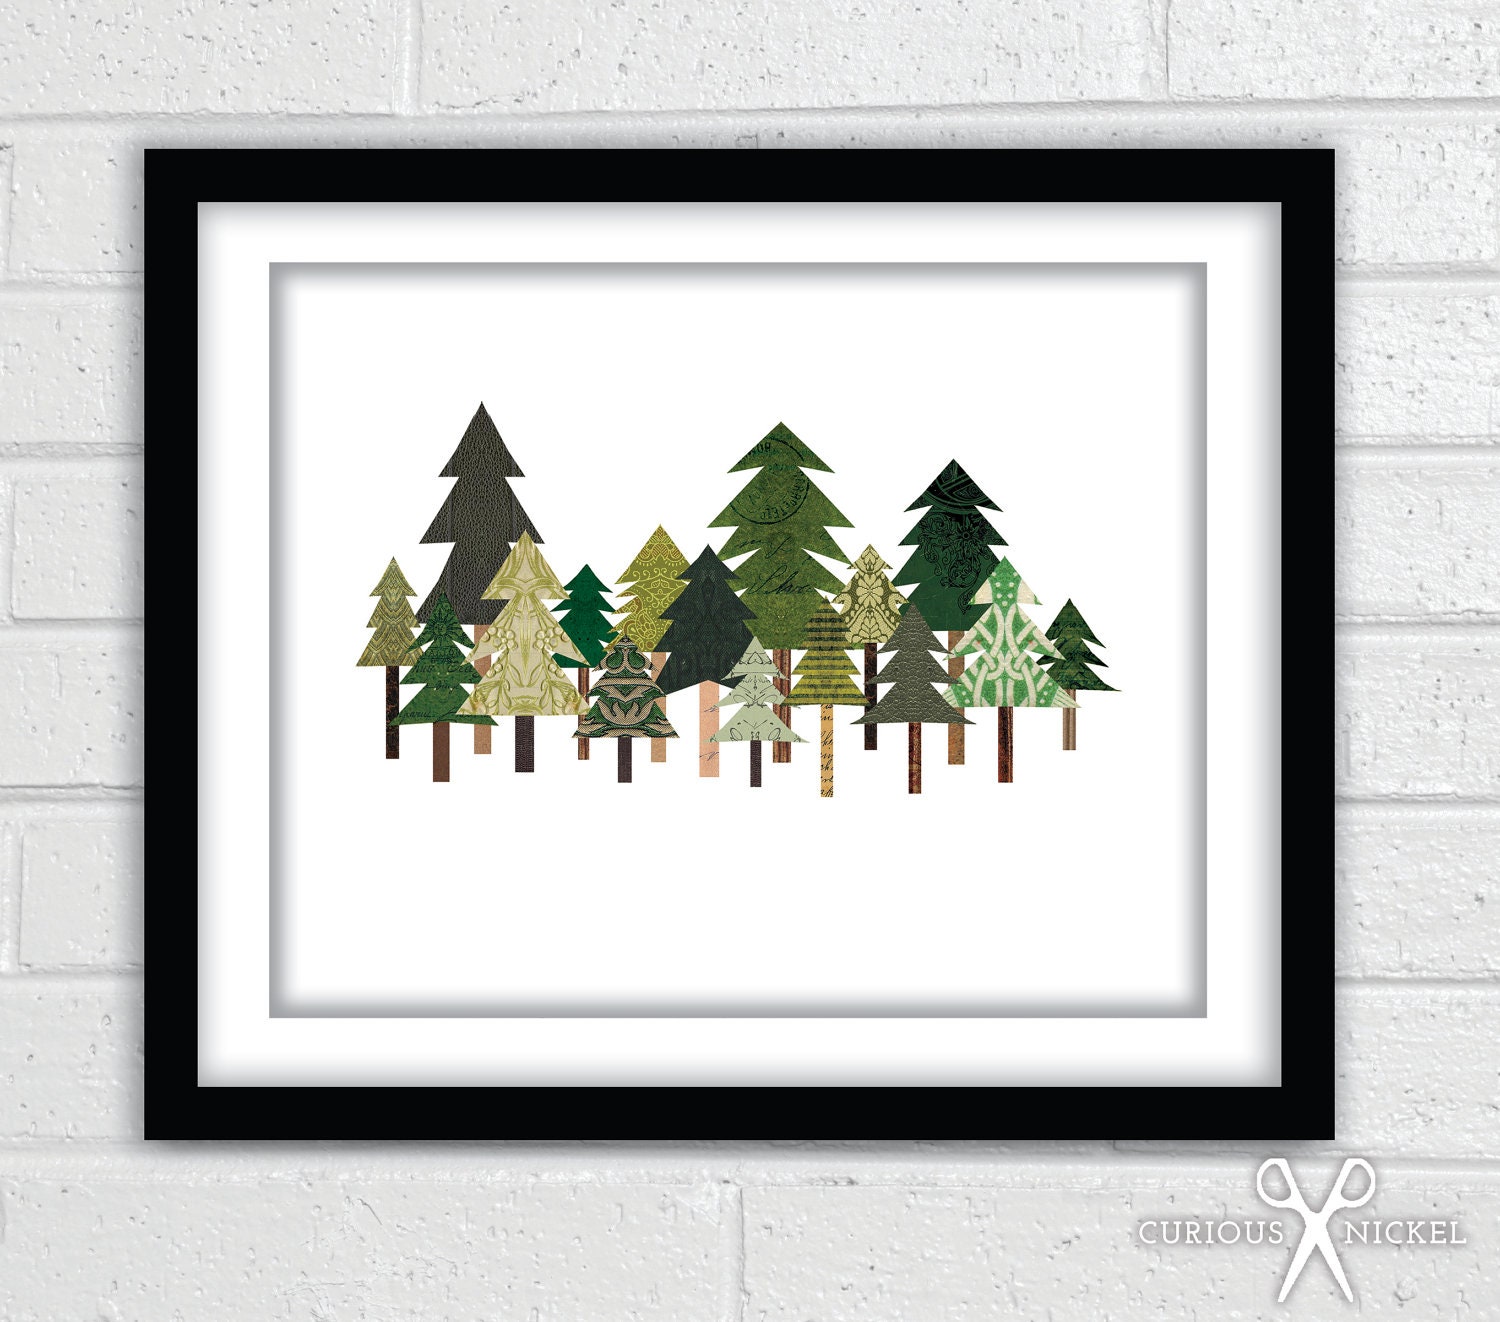 Tree Collage - Fine Art Giclee Print - 8x10 - TheCuriousNickel